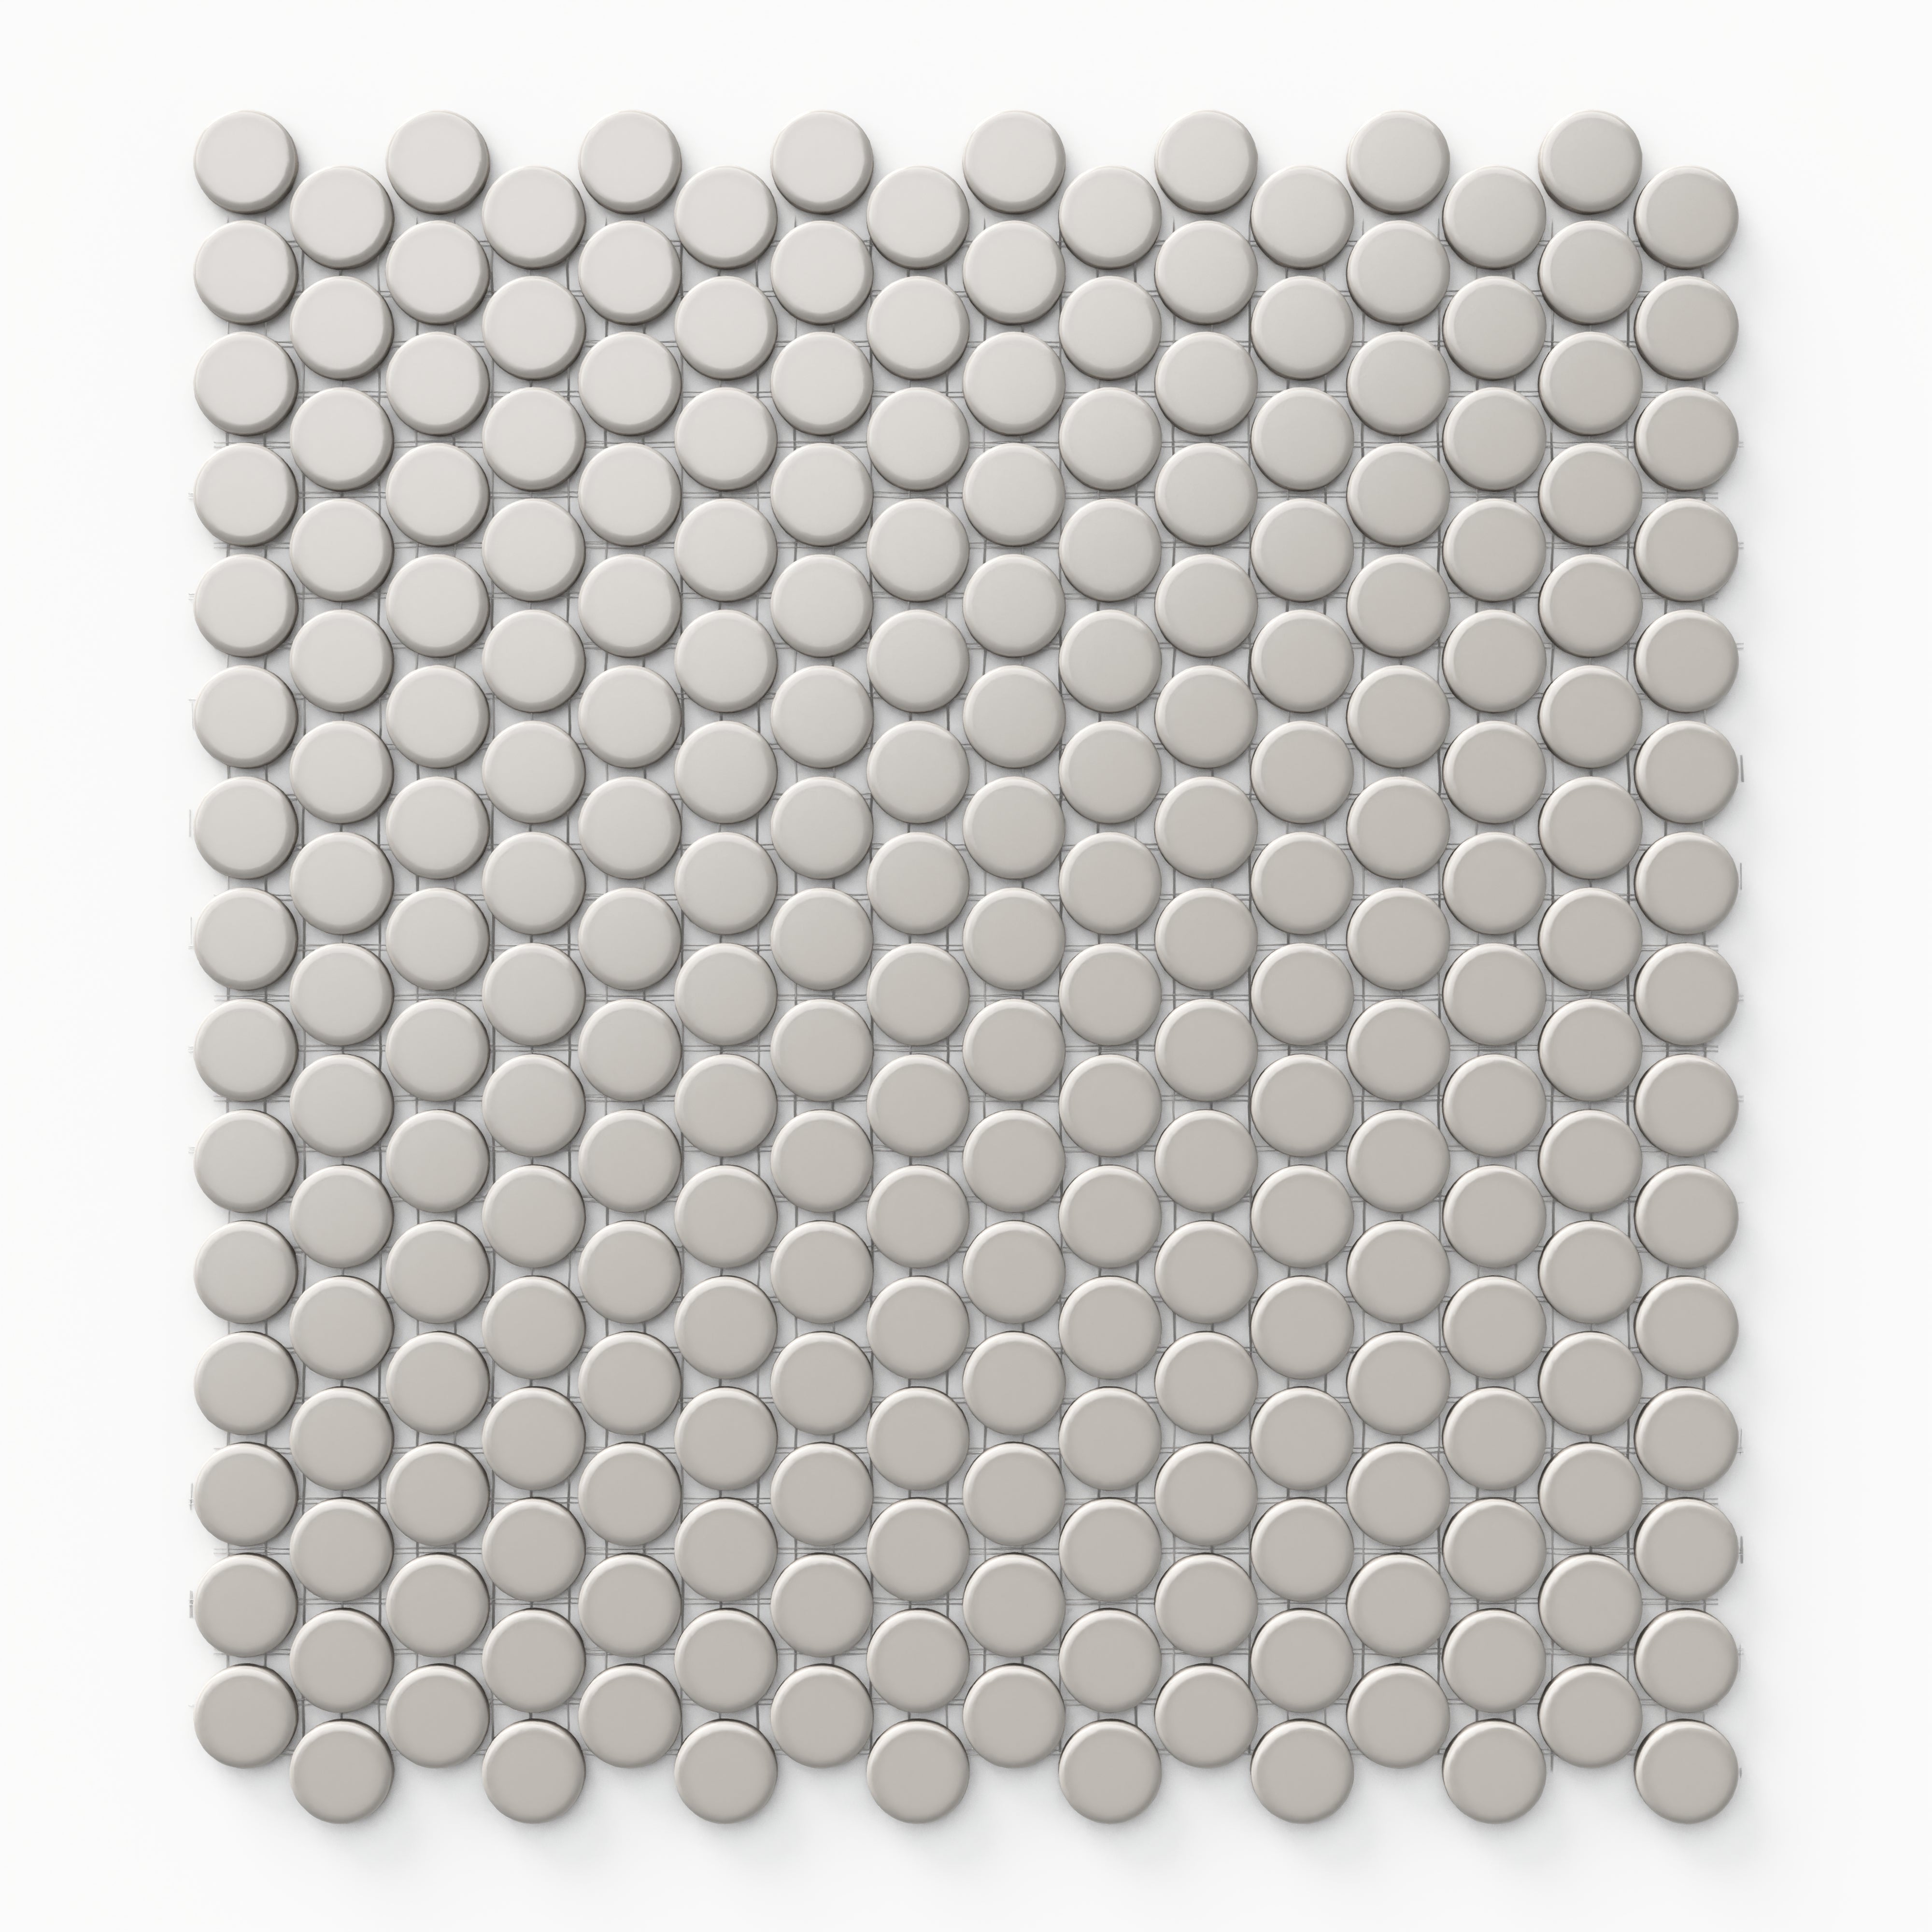 Ollie 3/4x3/4 Matte Porcelain Mosaic Penny Round Tile in Grey